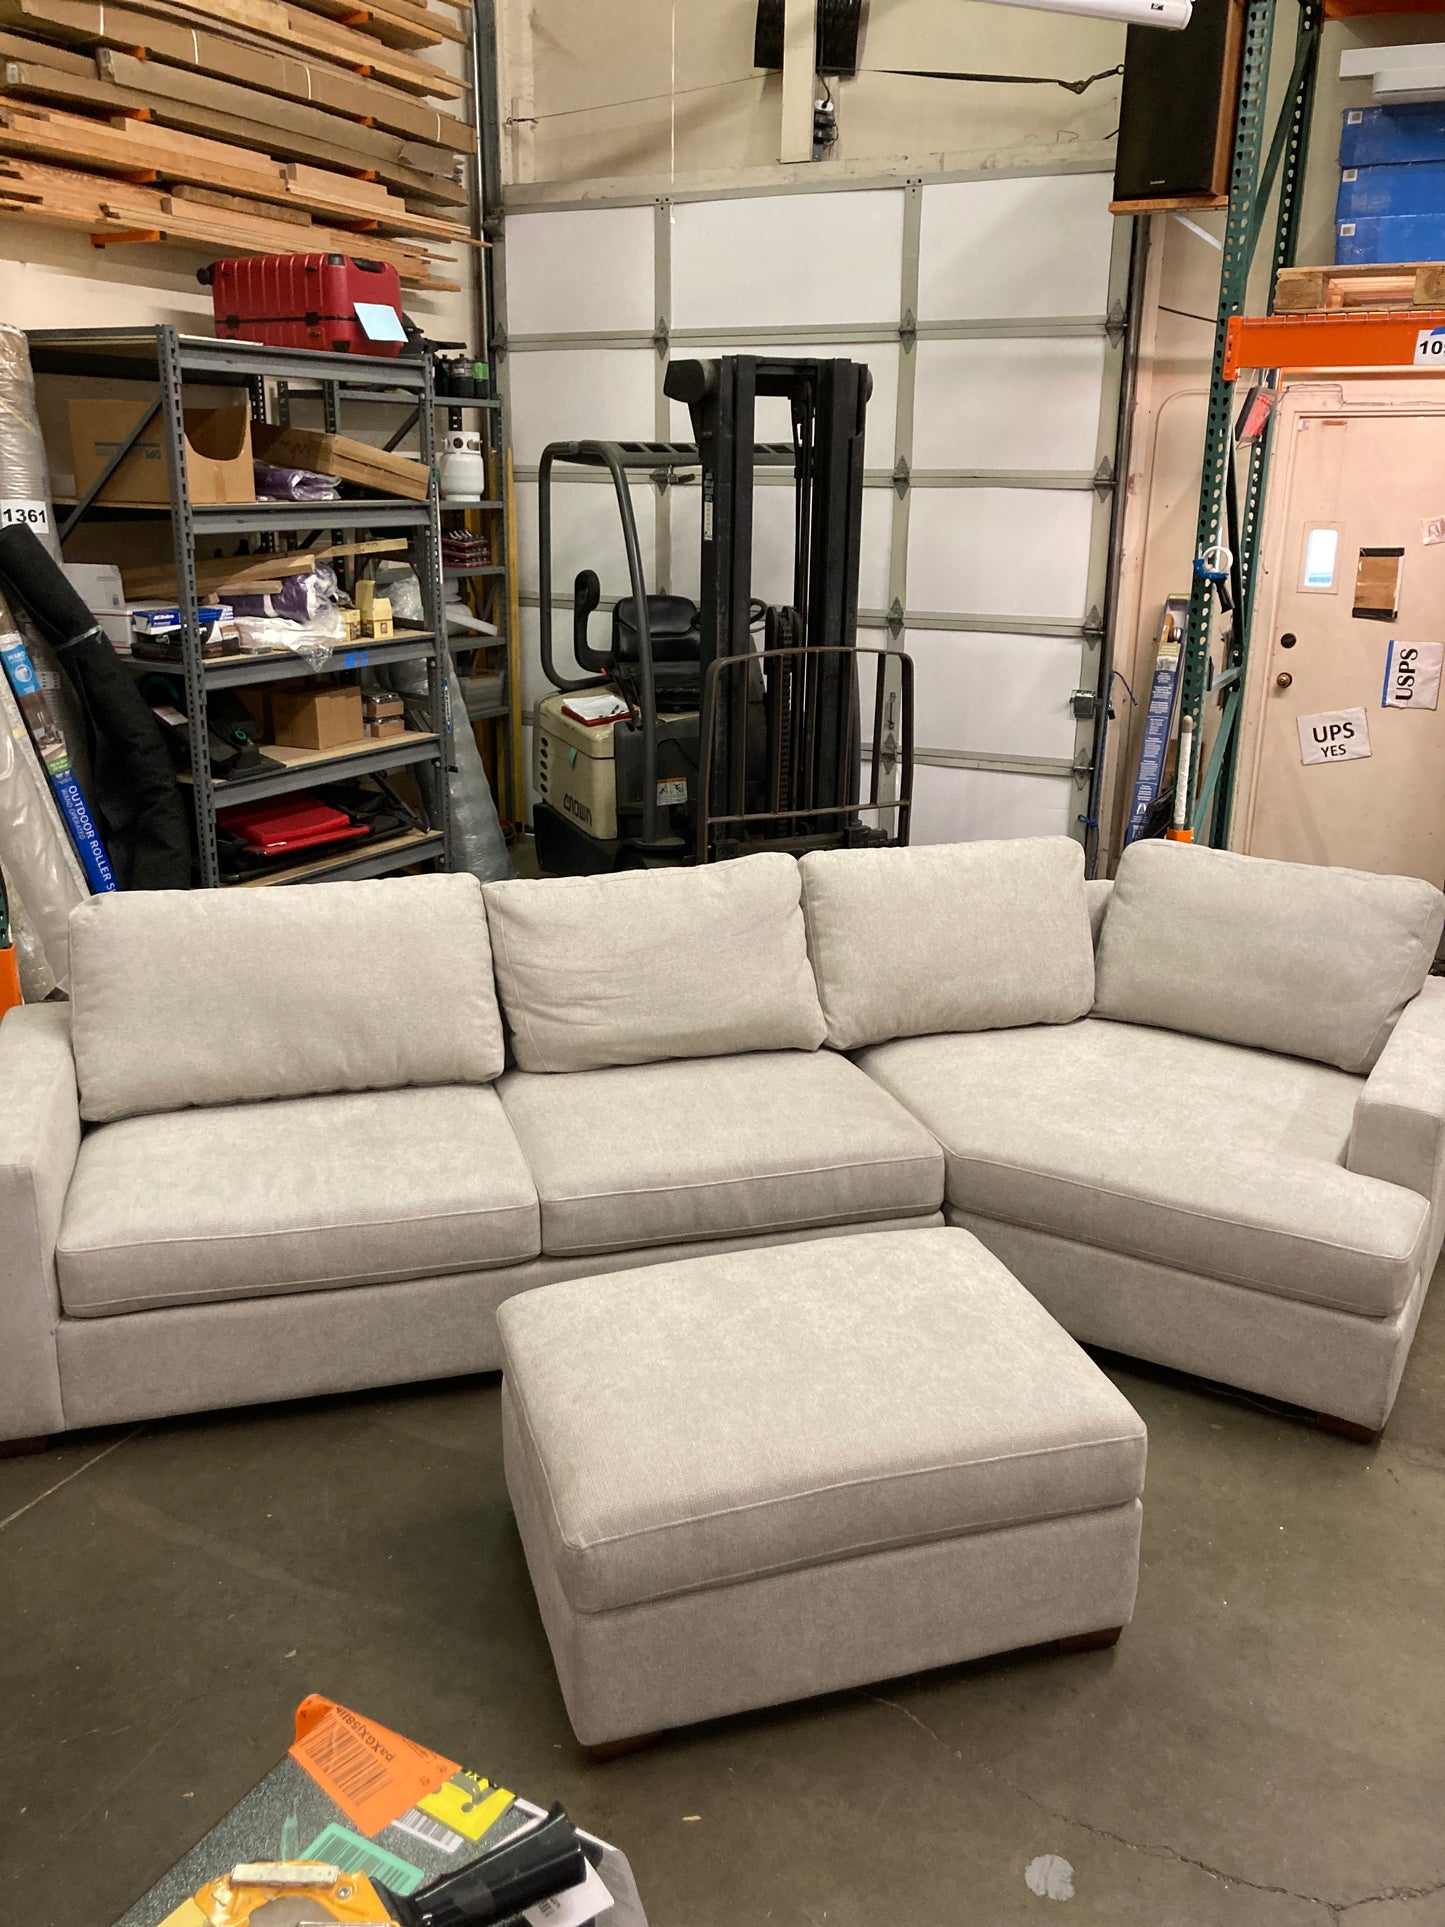 Costco - Thomasville Ezra Fabric Sectional with Ottoman - Retail $1799 Default Title